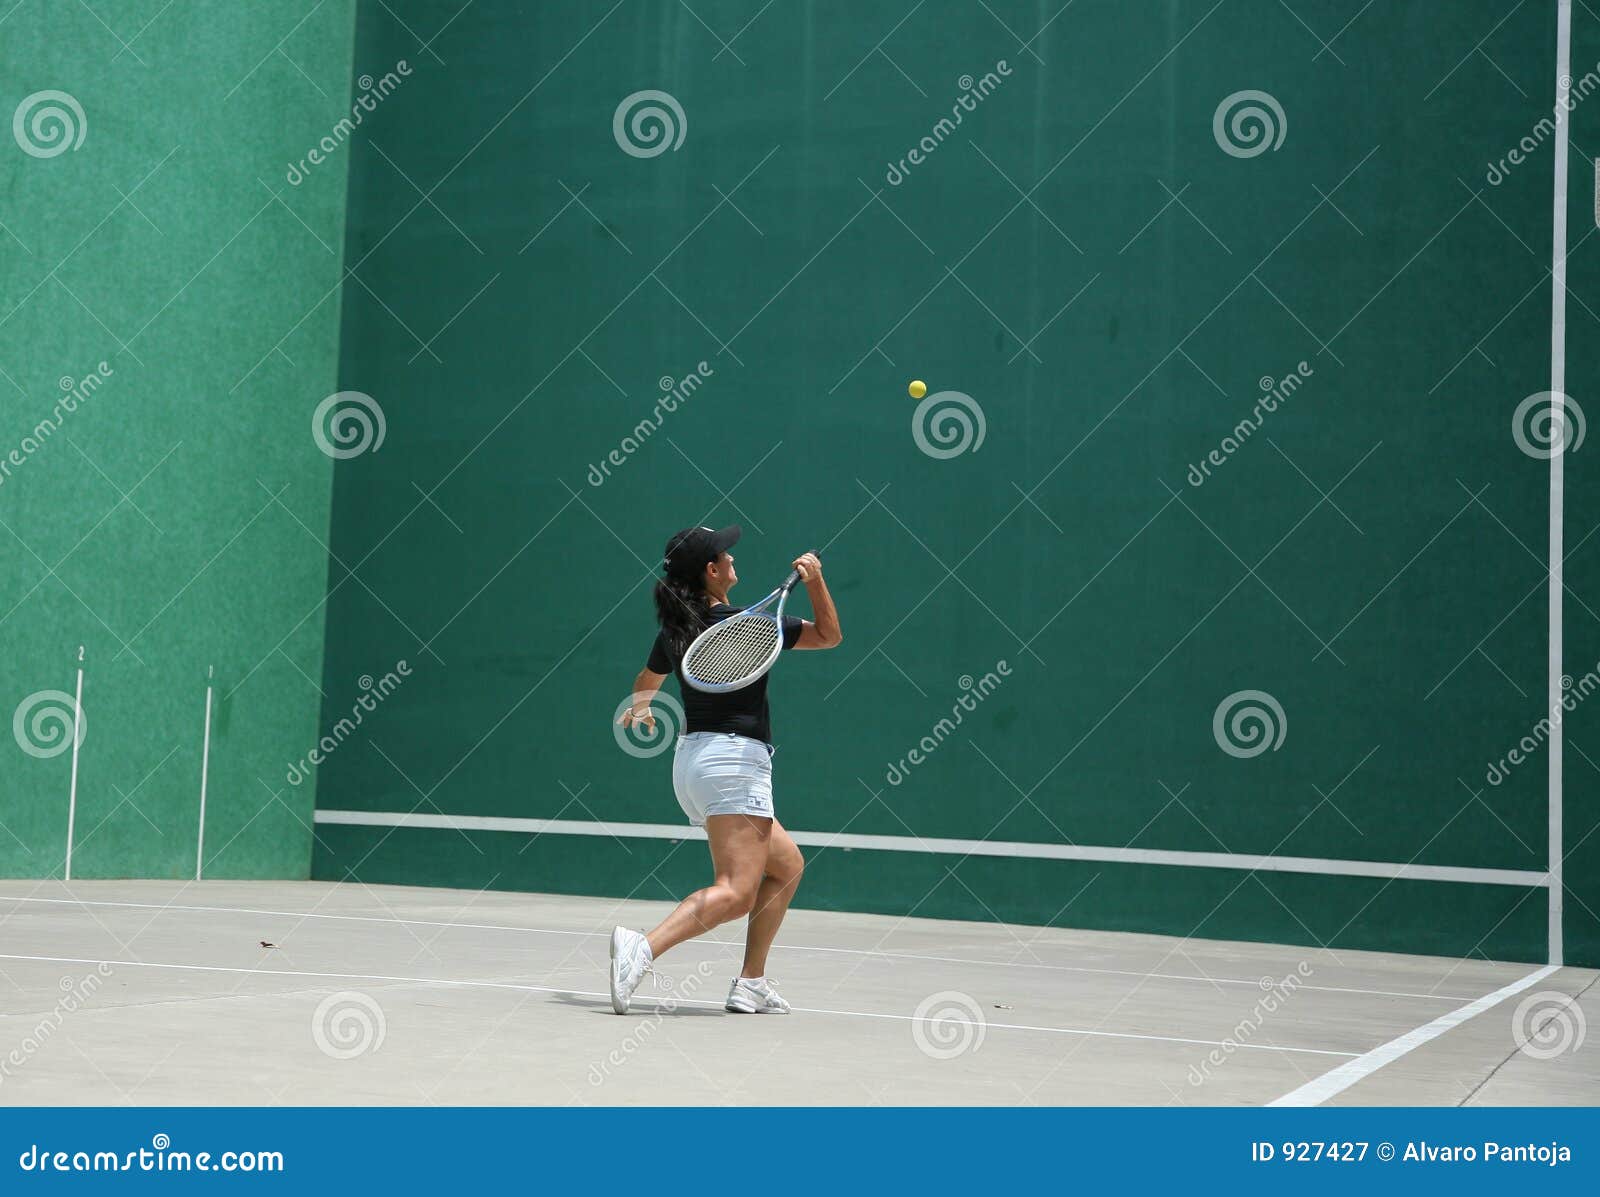 Fronton field stock image. Image of game, love, action - 927427